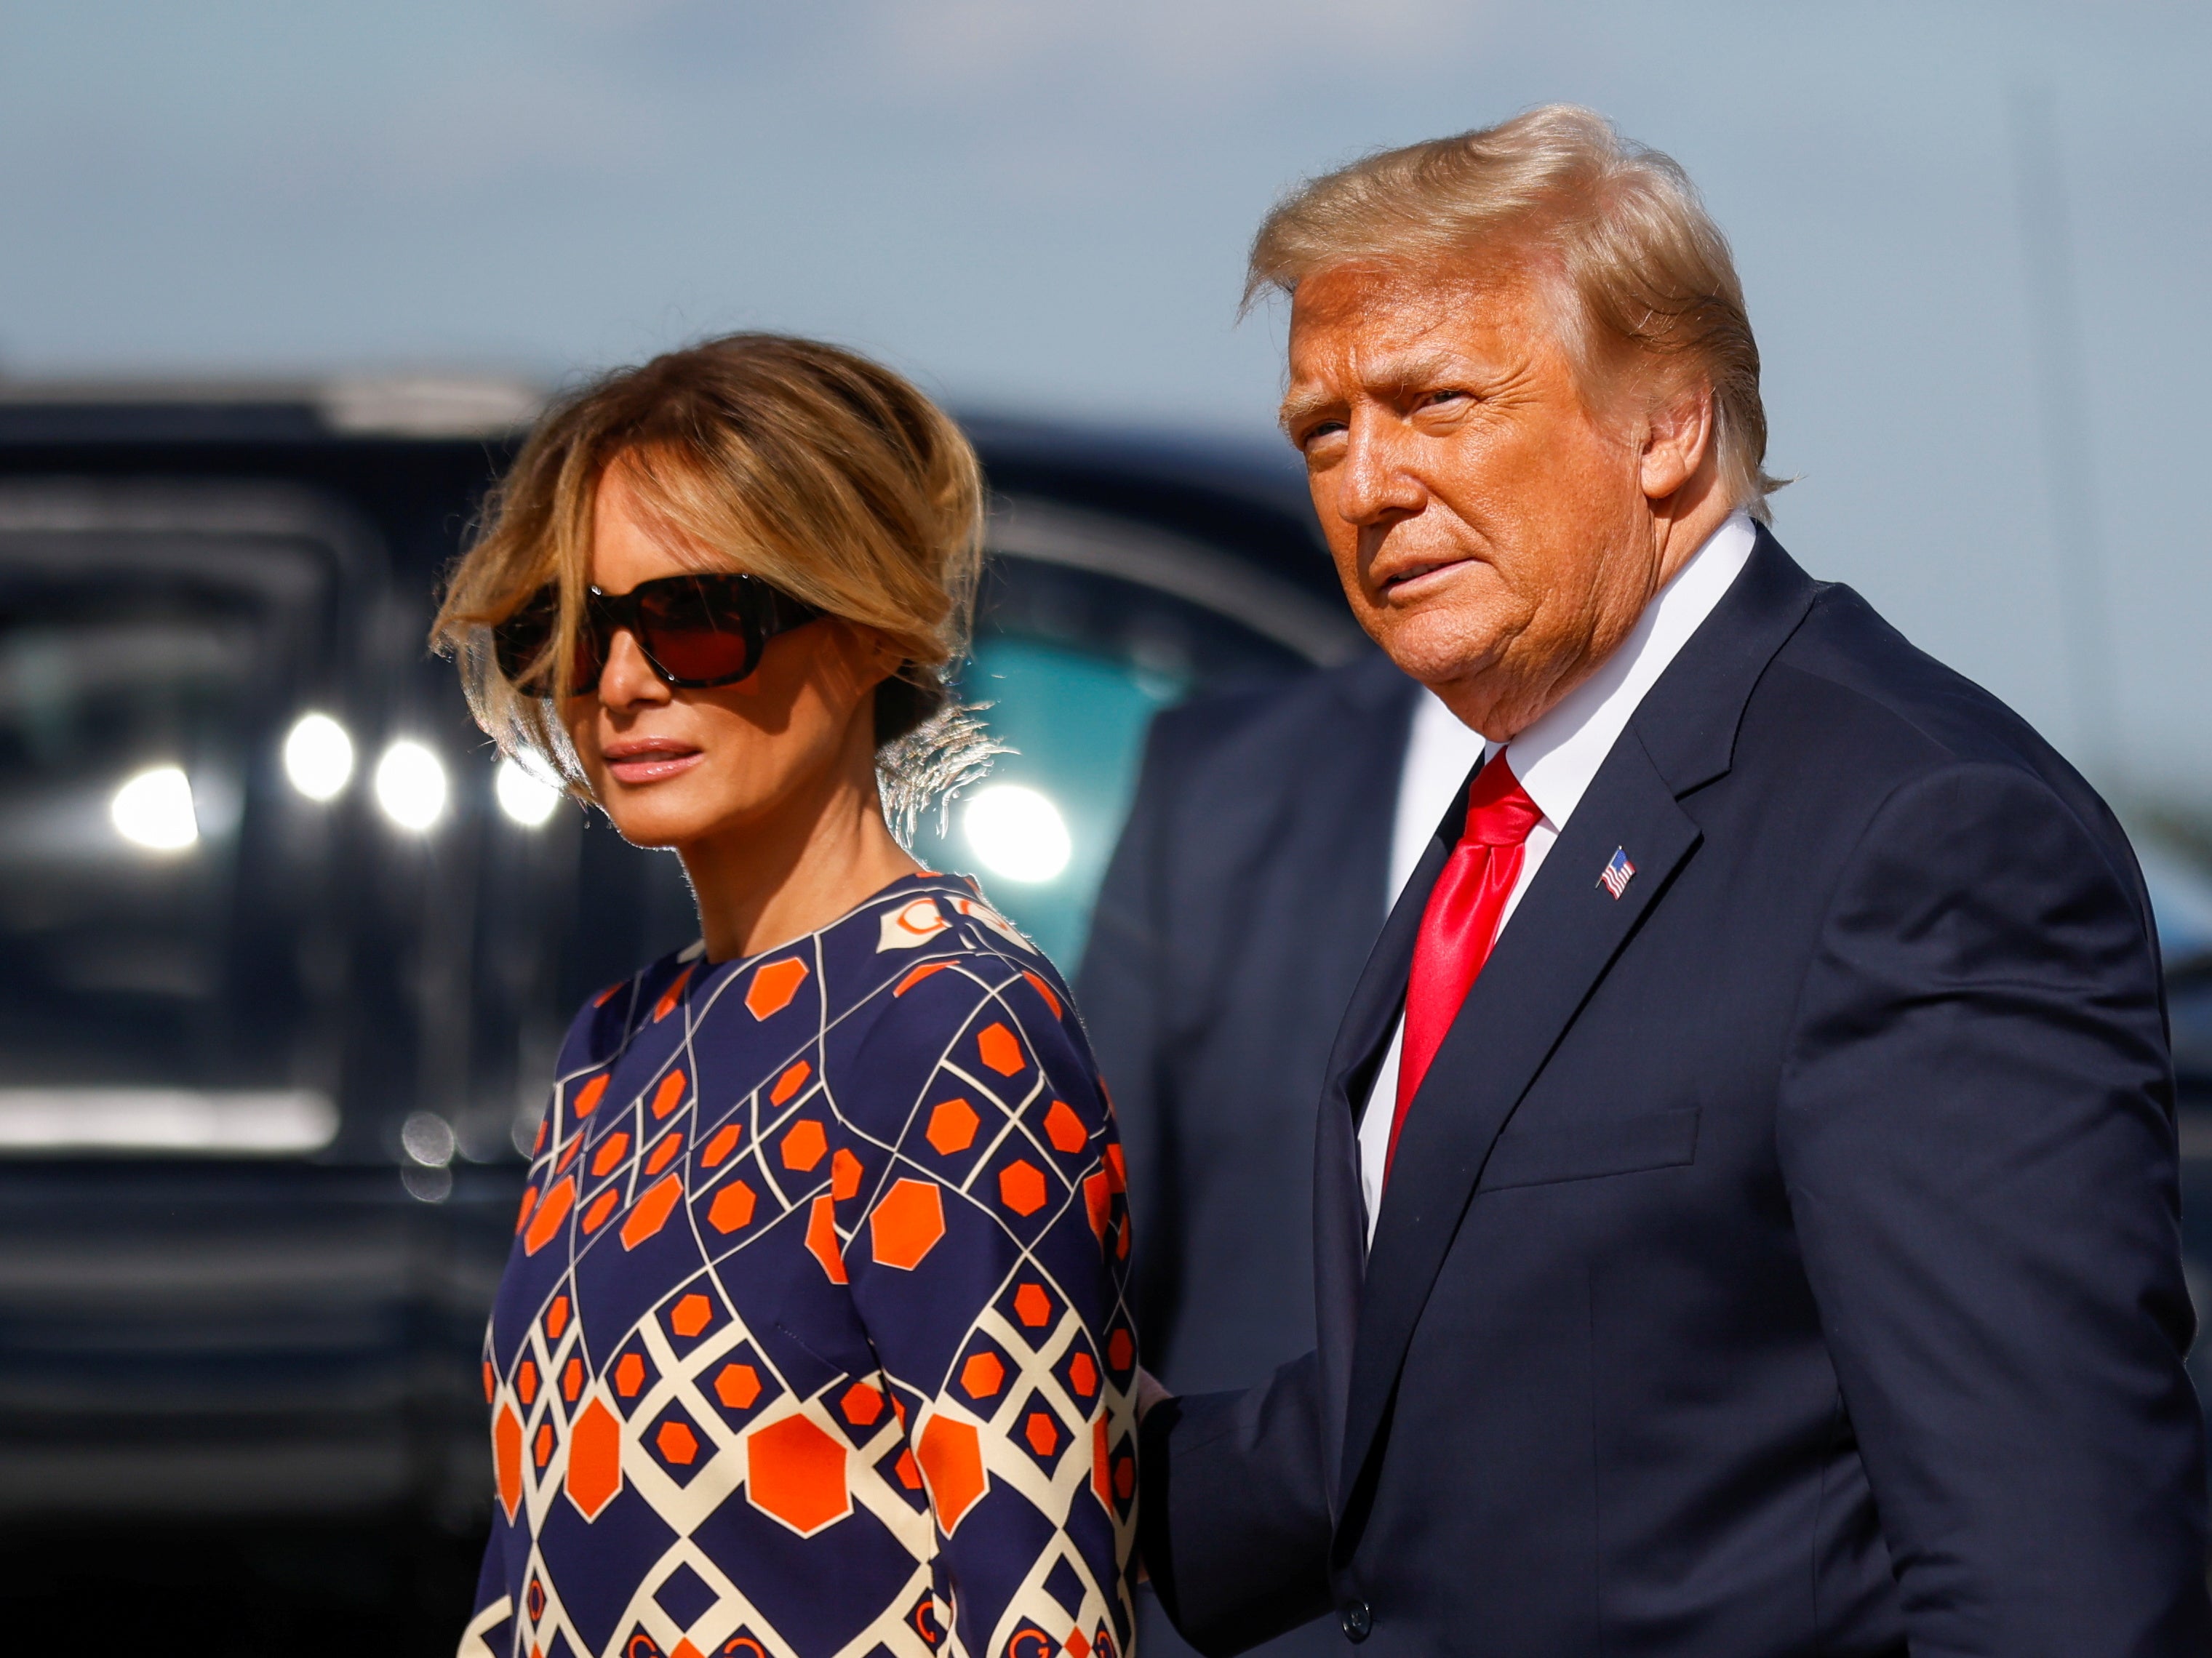 Donald Trump and Melania Trump arrive at Palm Beach International Airport in West Palm Beach, Florida after departing Washington before the inauguration ceremony of Joe Biden